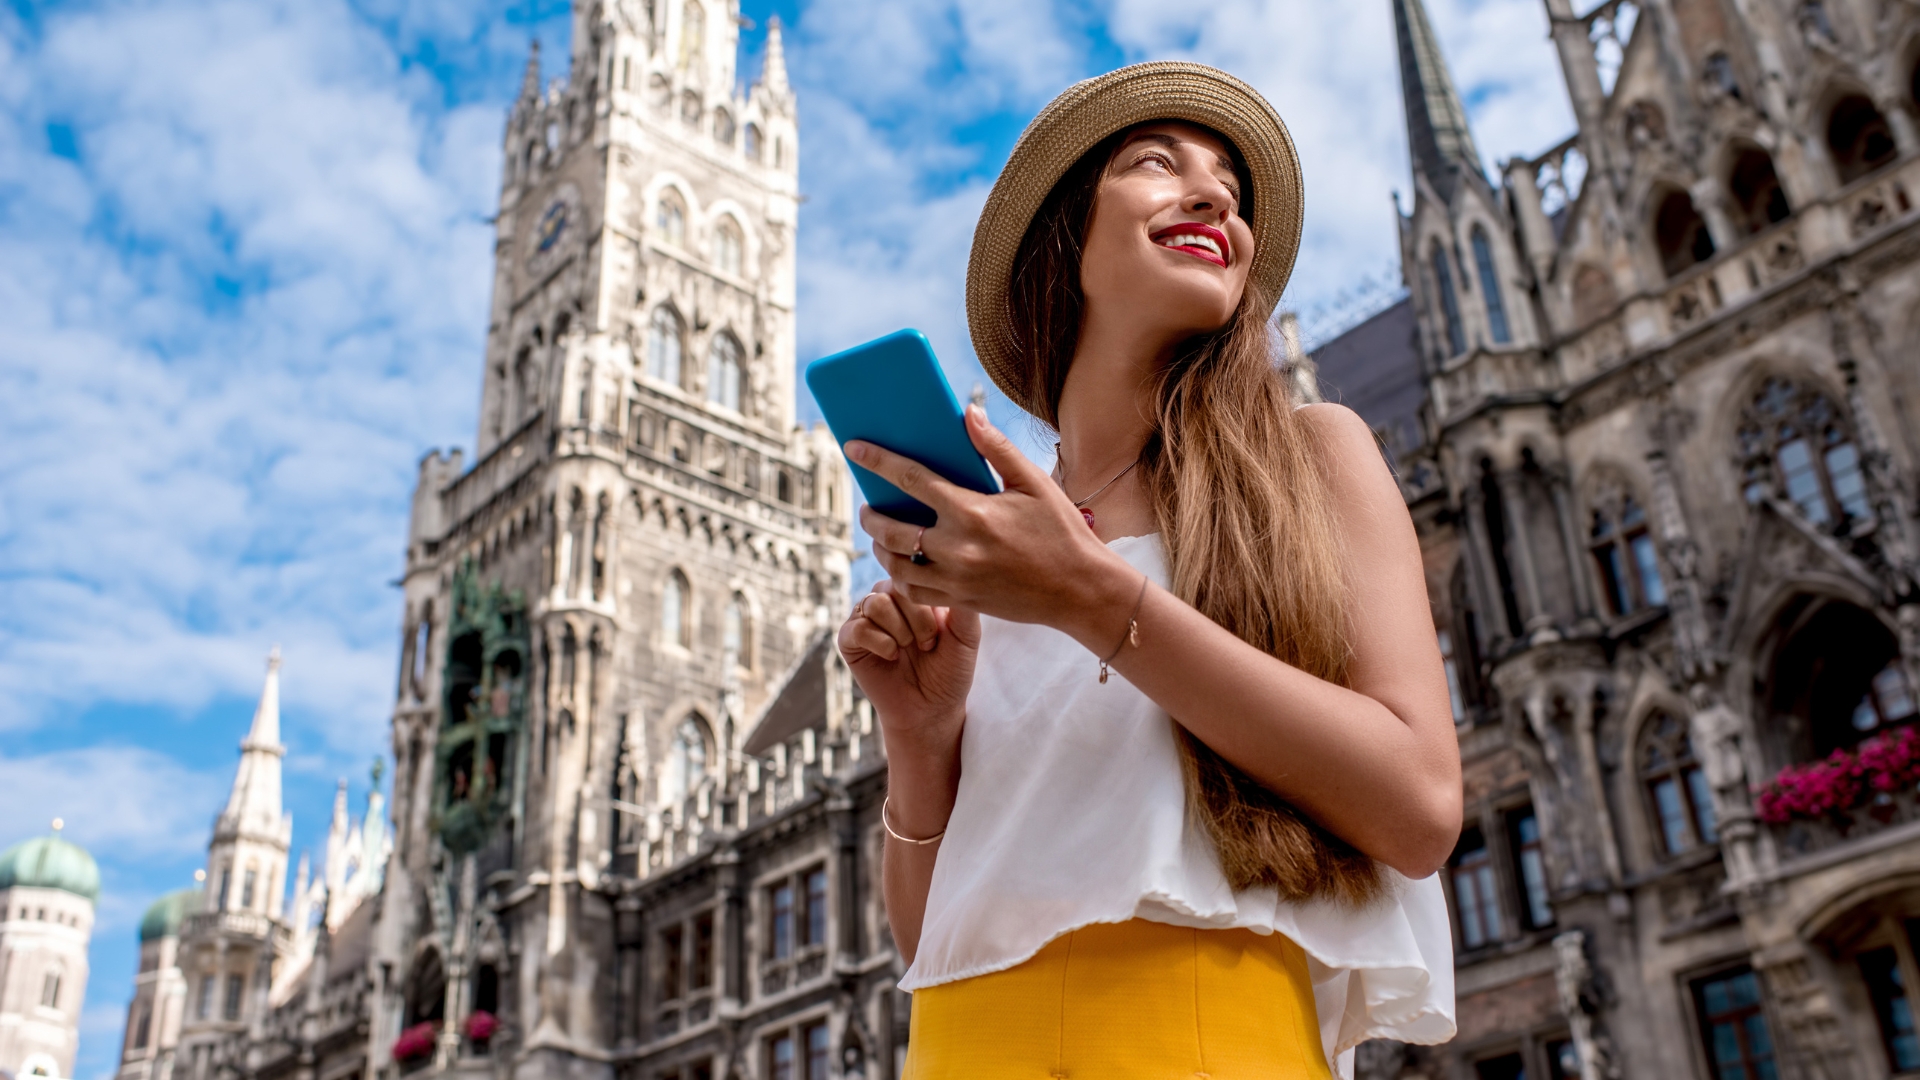 a traveller woman wear straw hat, white shirt and yellow skirt holds a blue case phone and see the landscape of historical city buildings